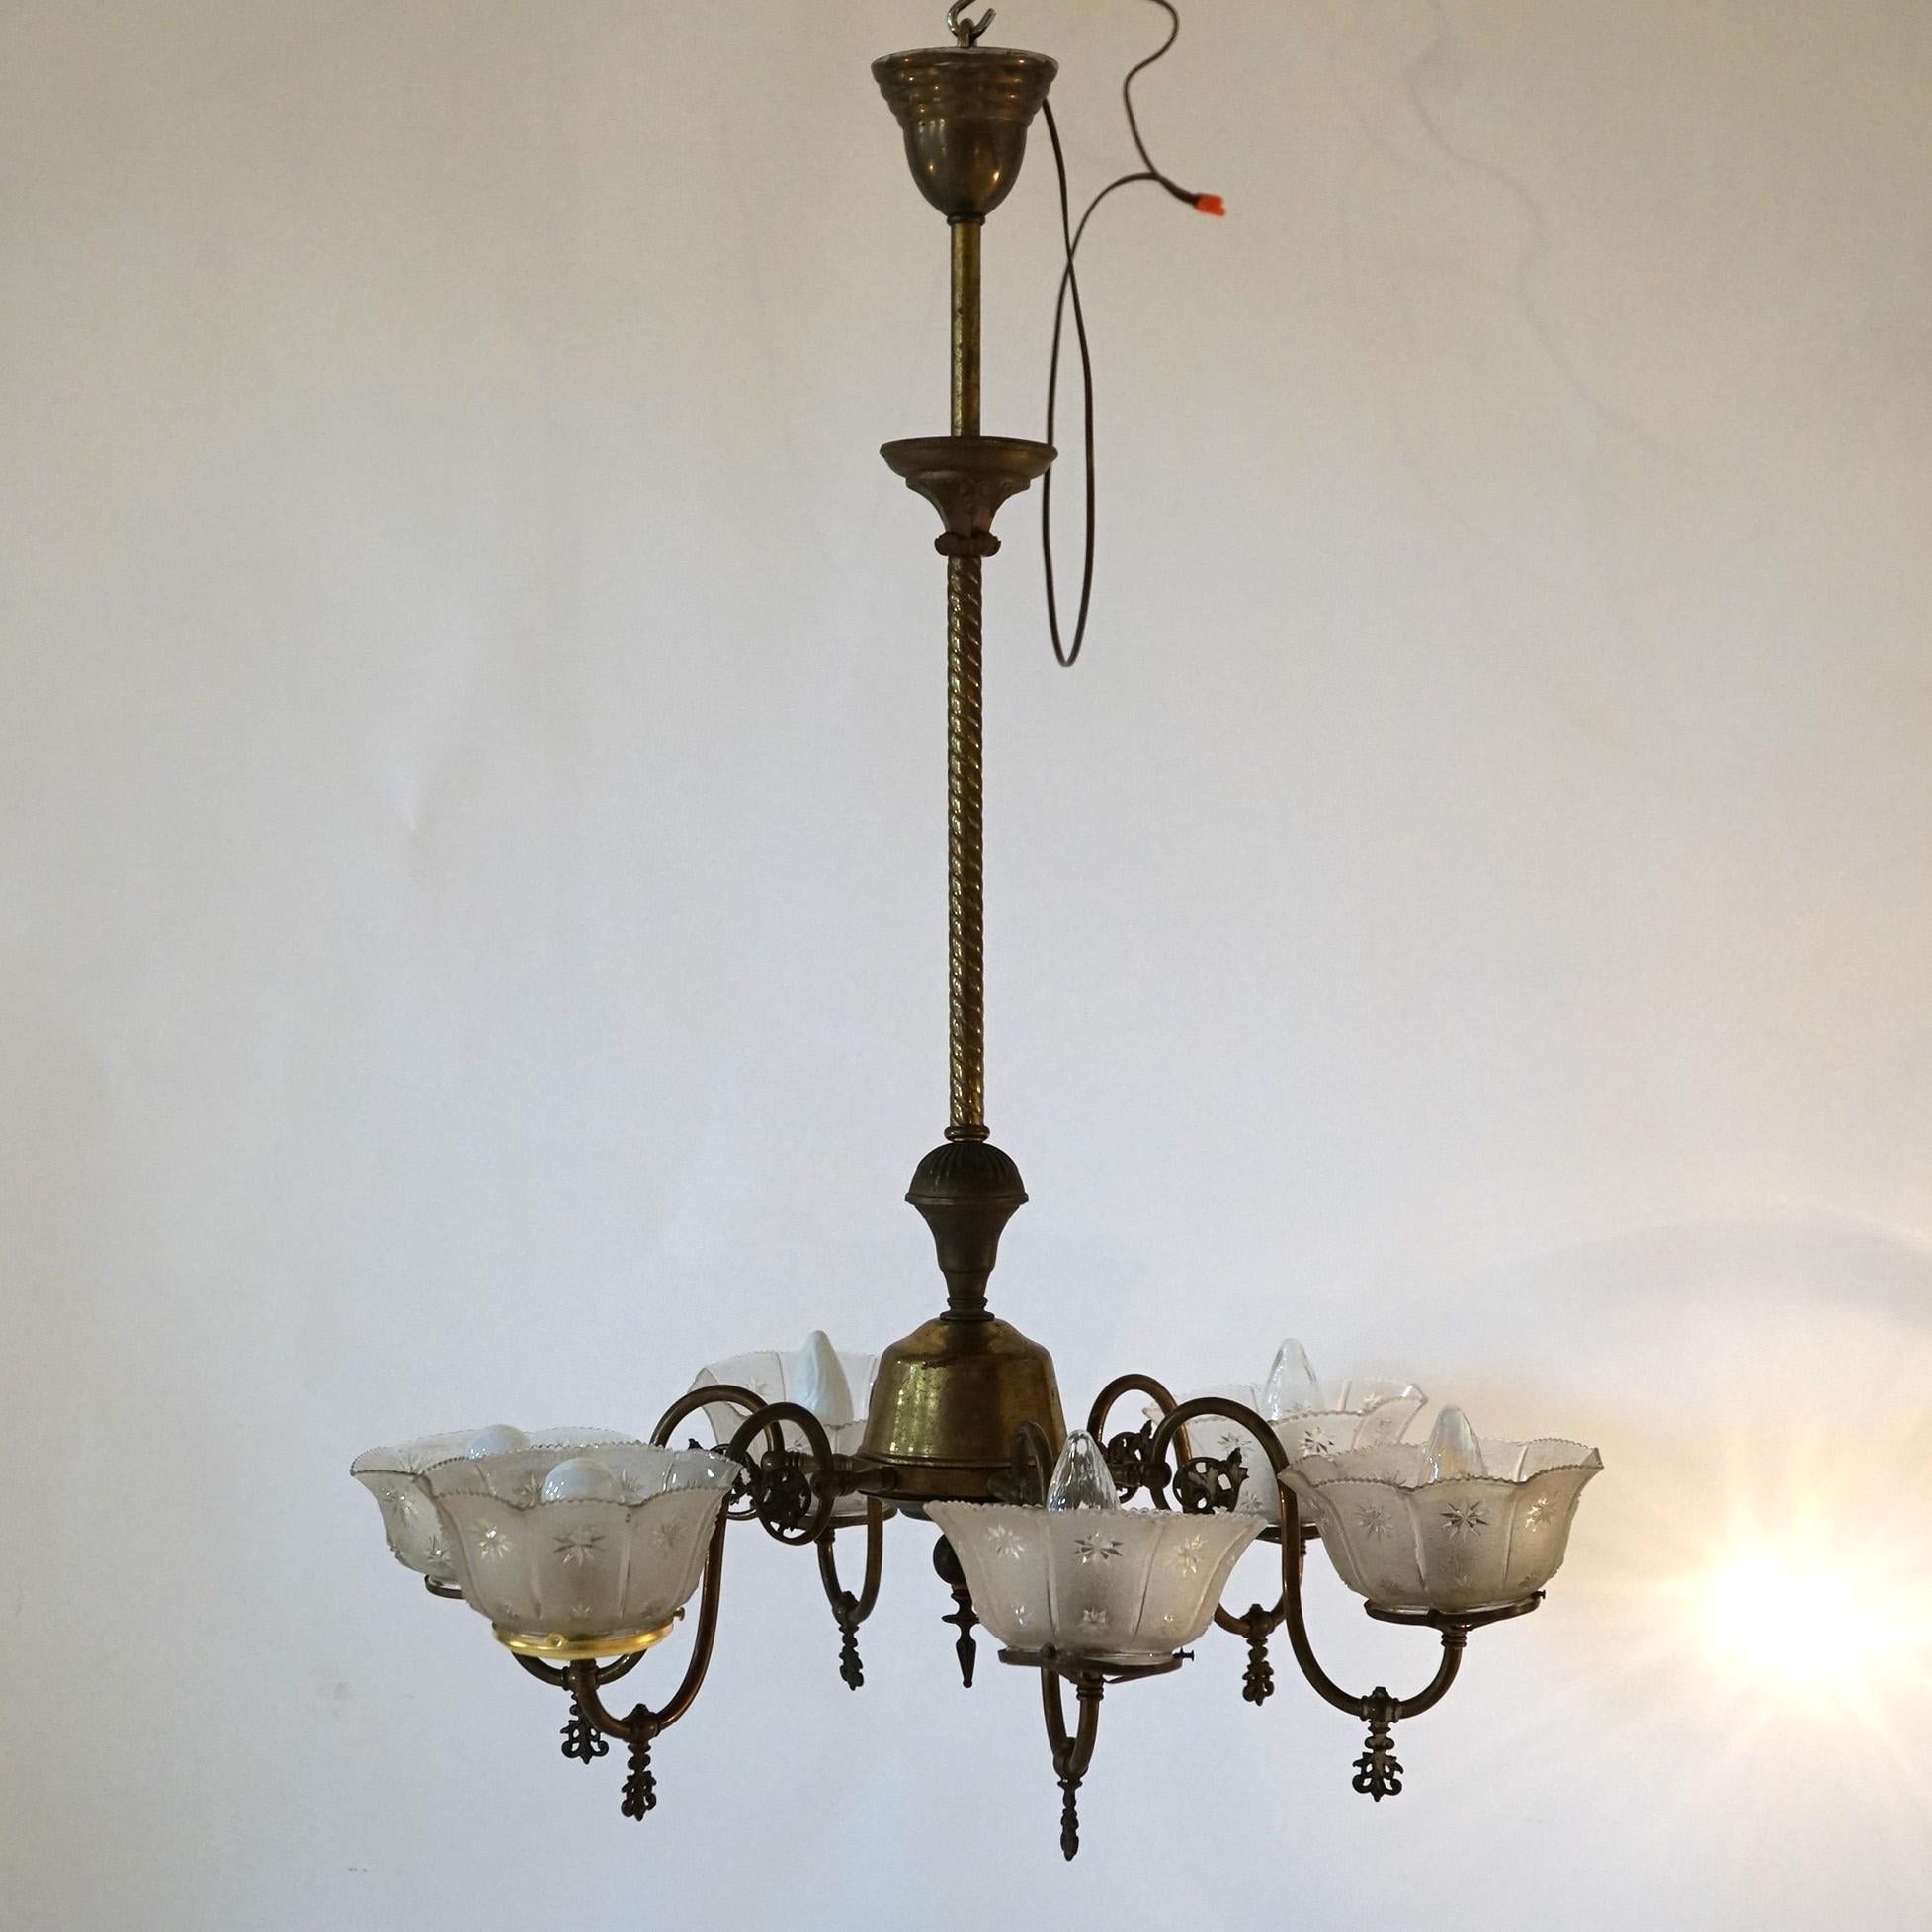 Antique Six Arm Brass Gas Chandelier with Glass Shades, Electrified, Circa 1890 10